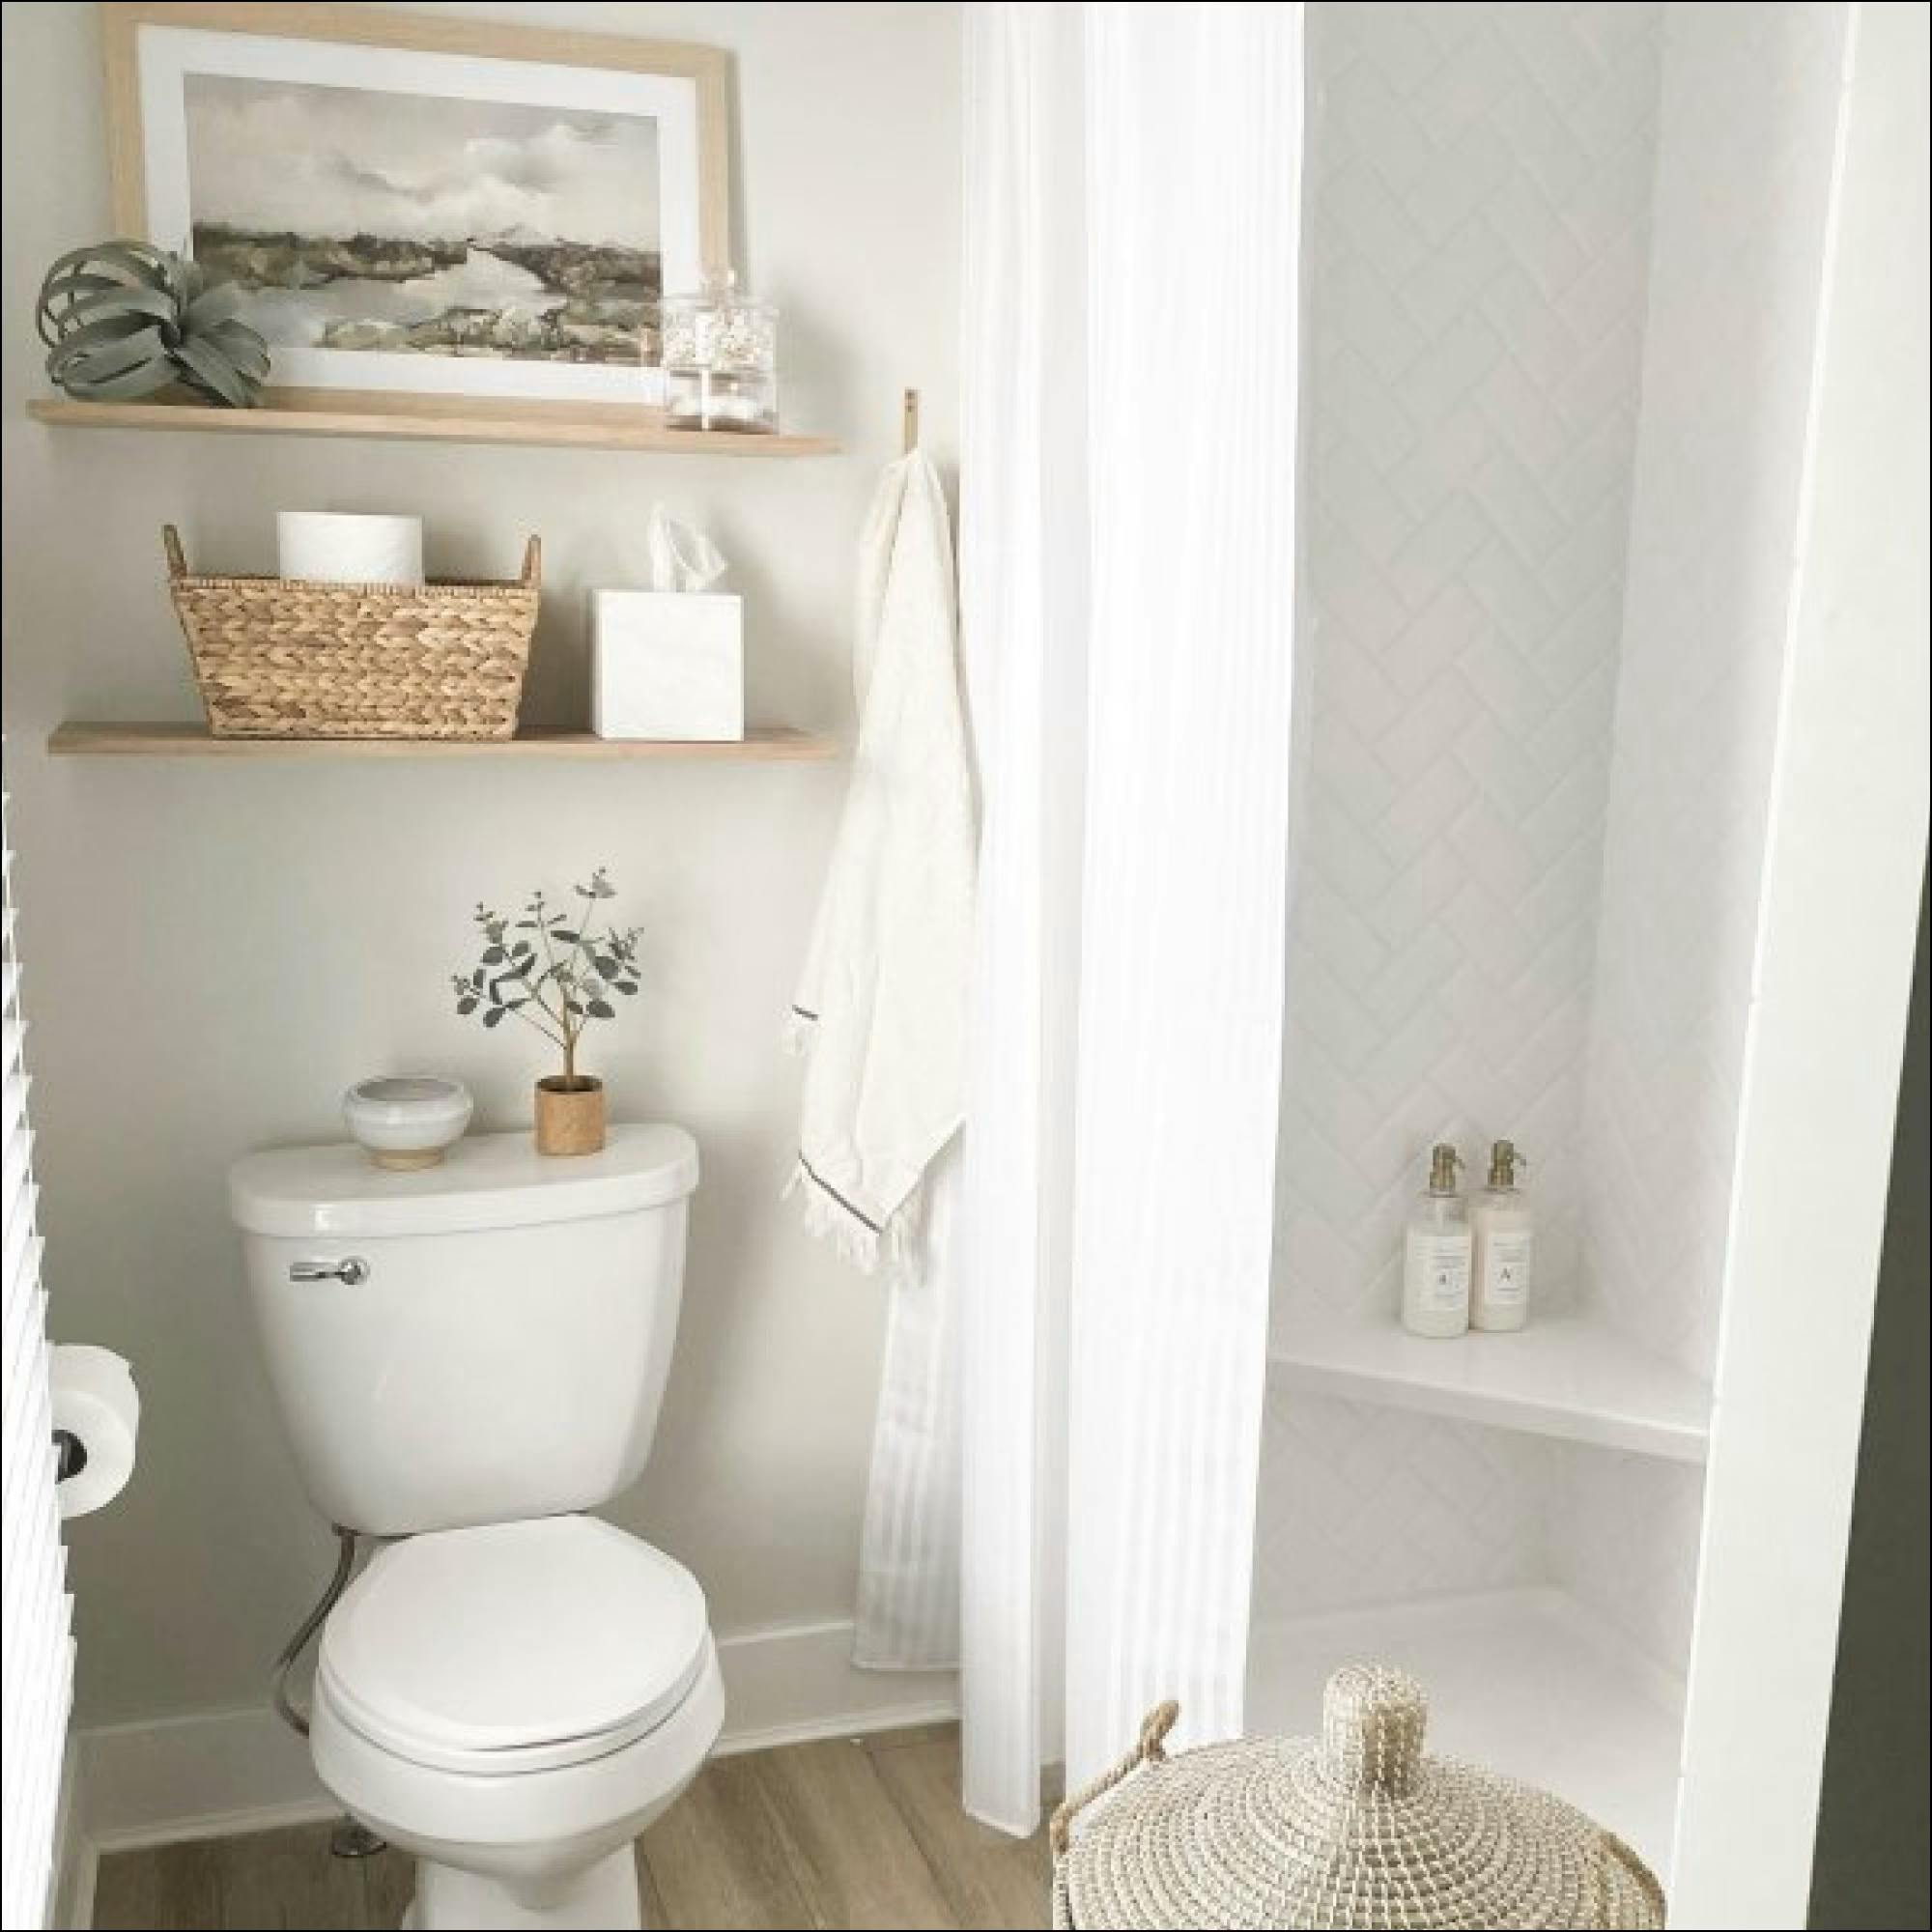 A bathroom painted in Sherwin-Williams Alabaster (SW 7008) by @theadlerhouse.